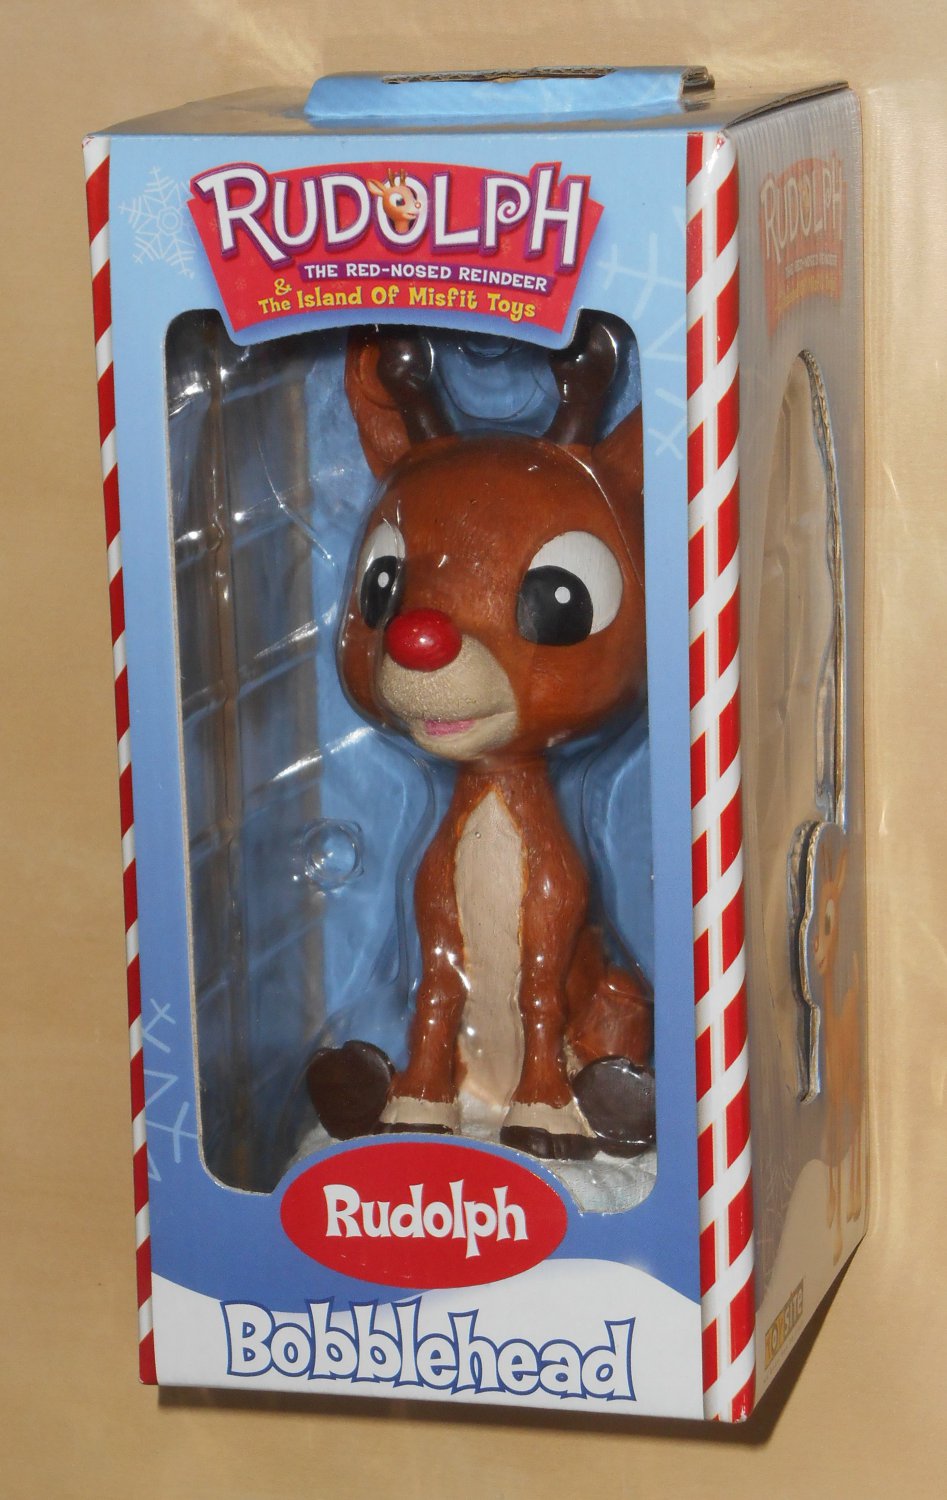 Rudolph Bobblehead Bobble Head Island of Misfit Toys Red Nosed Reindeer BD&A NIB 2001